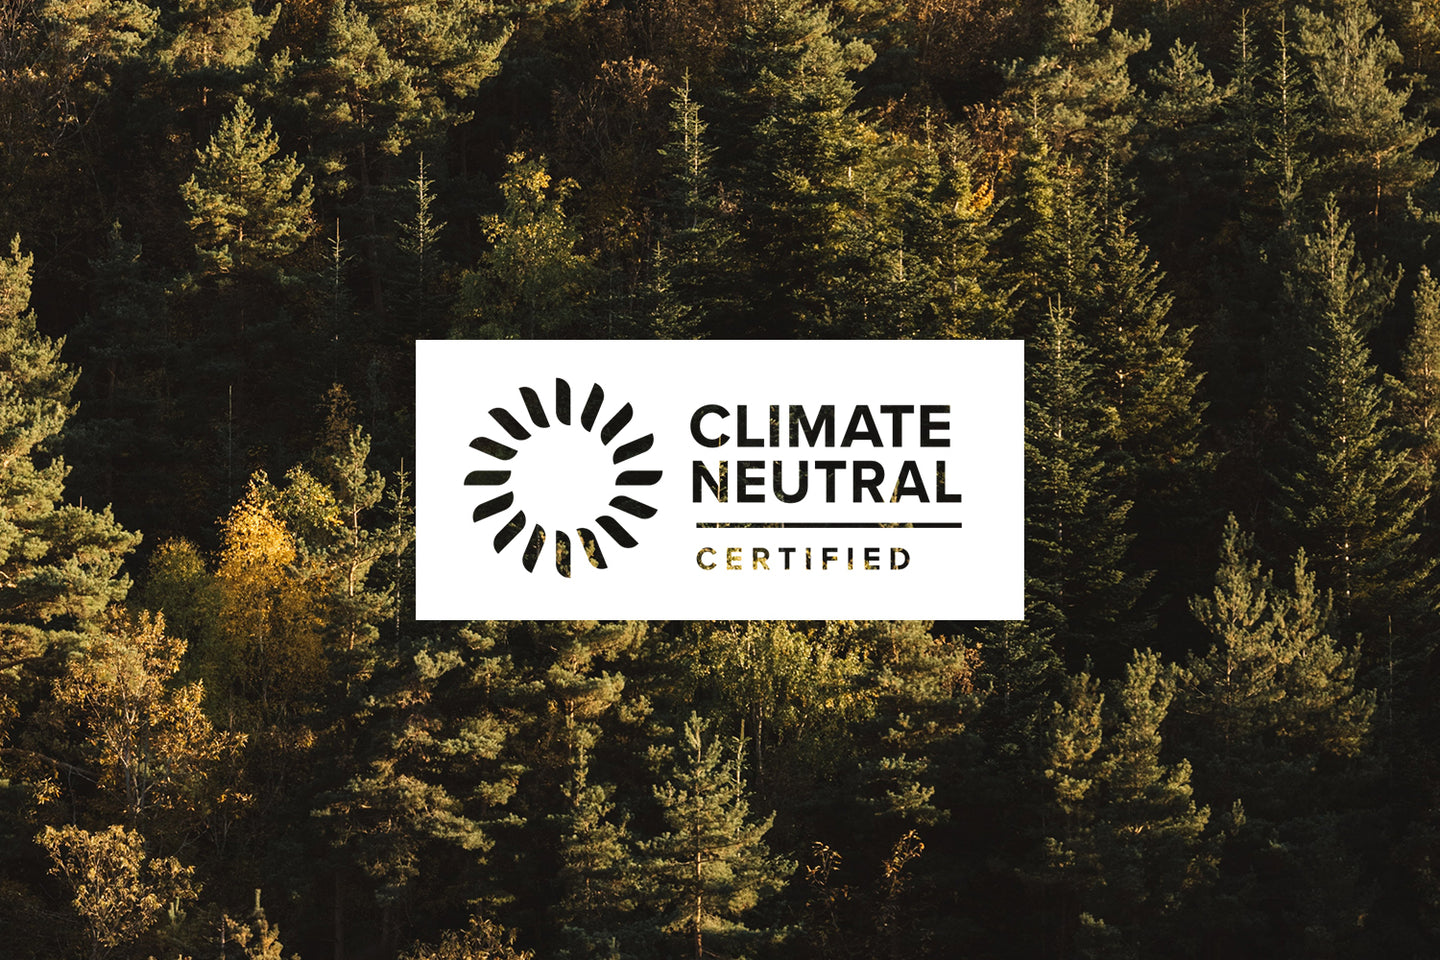 What Does it Mean to be Climate Neutral?